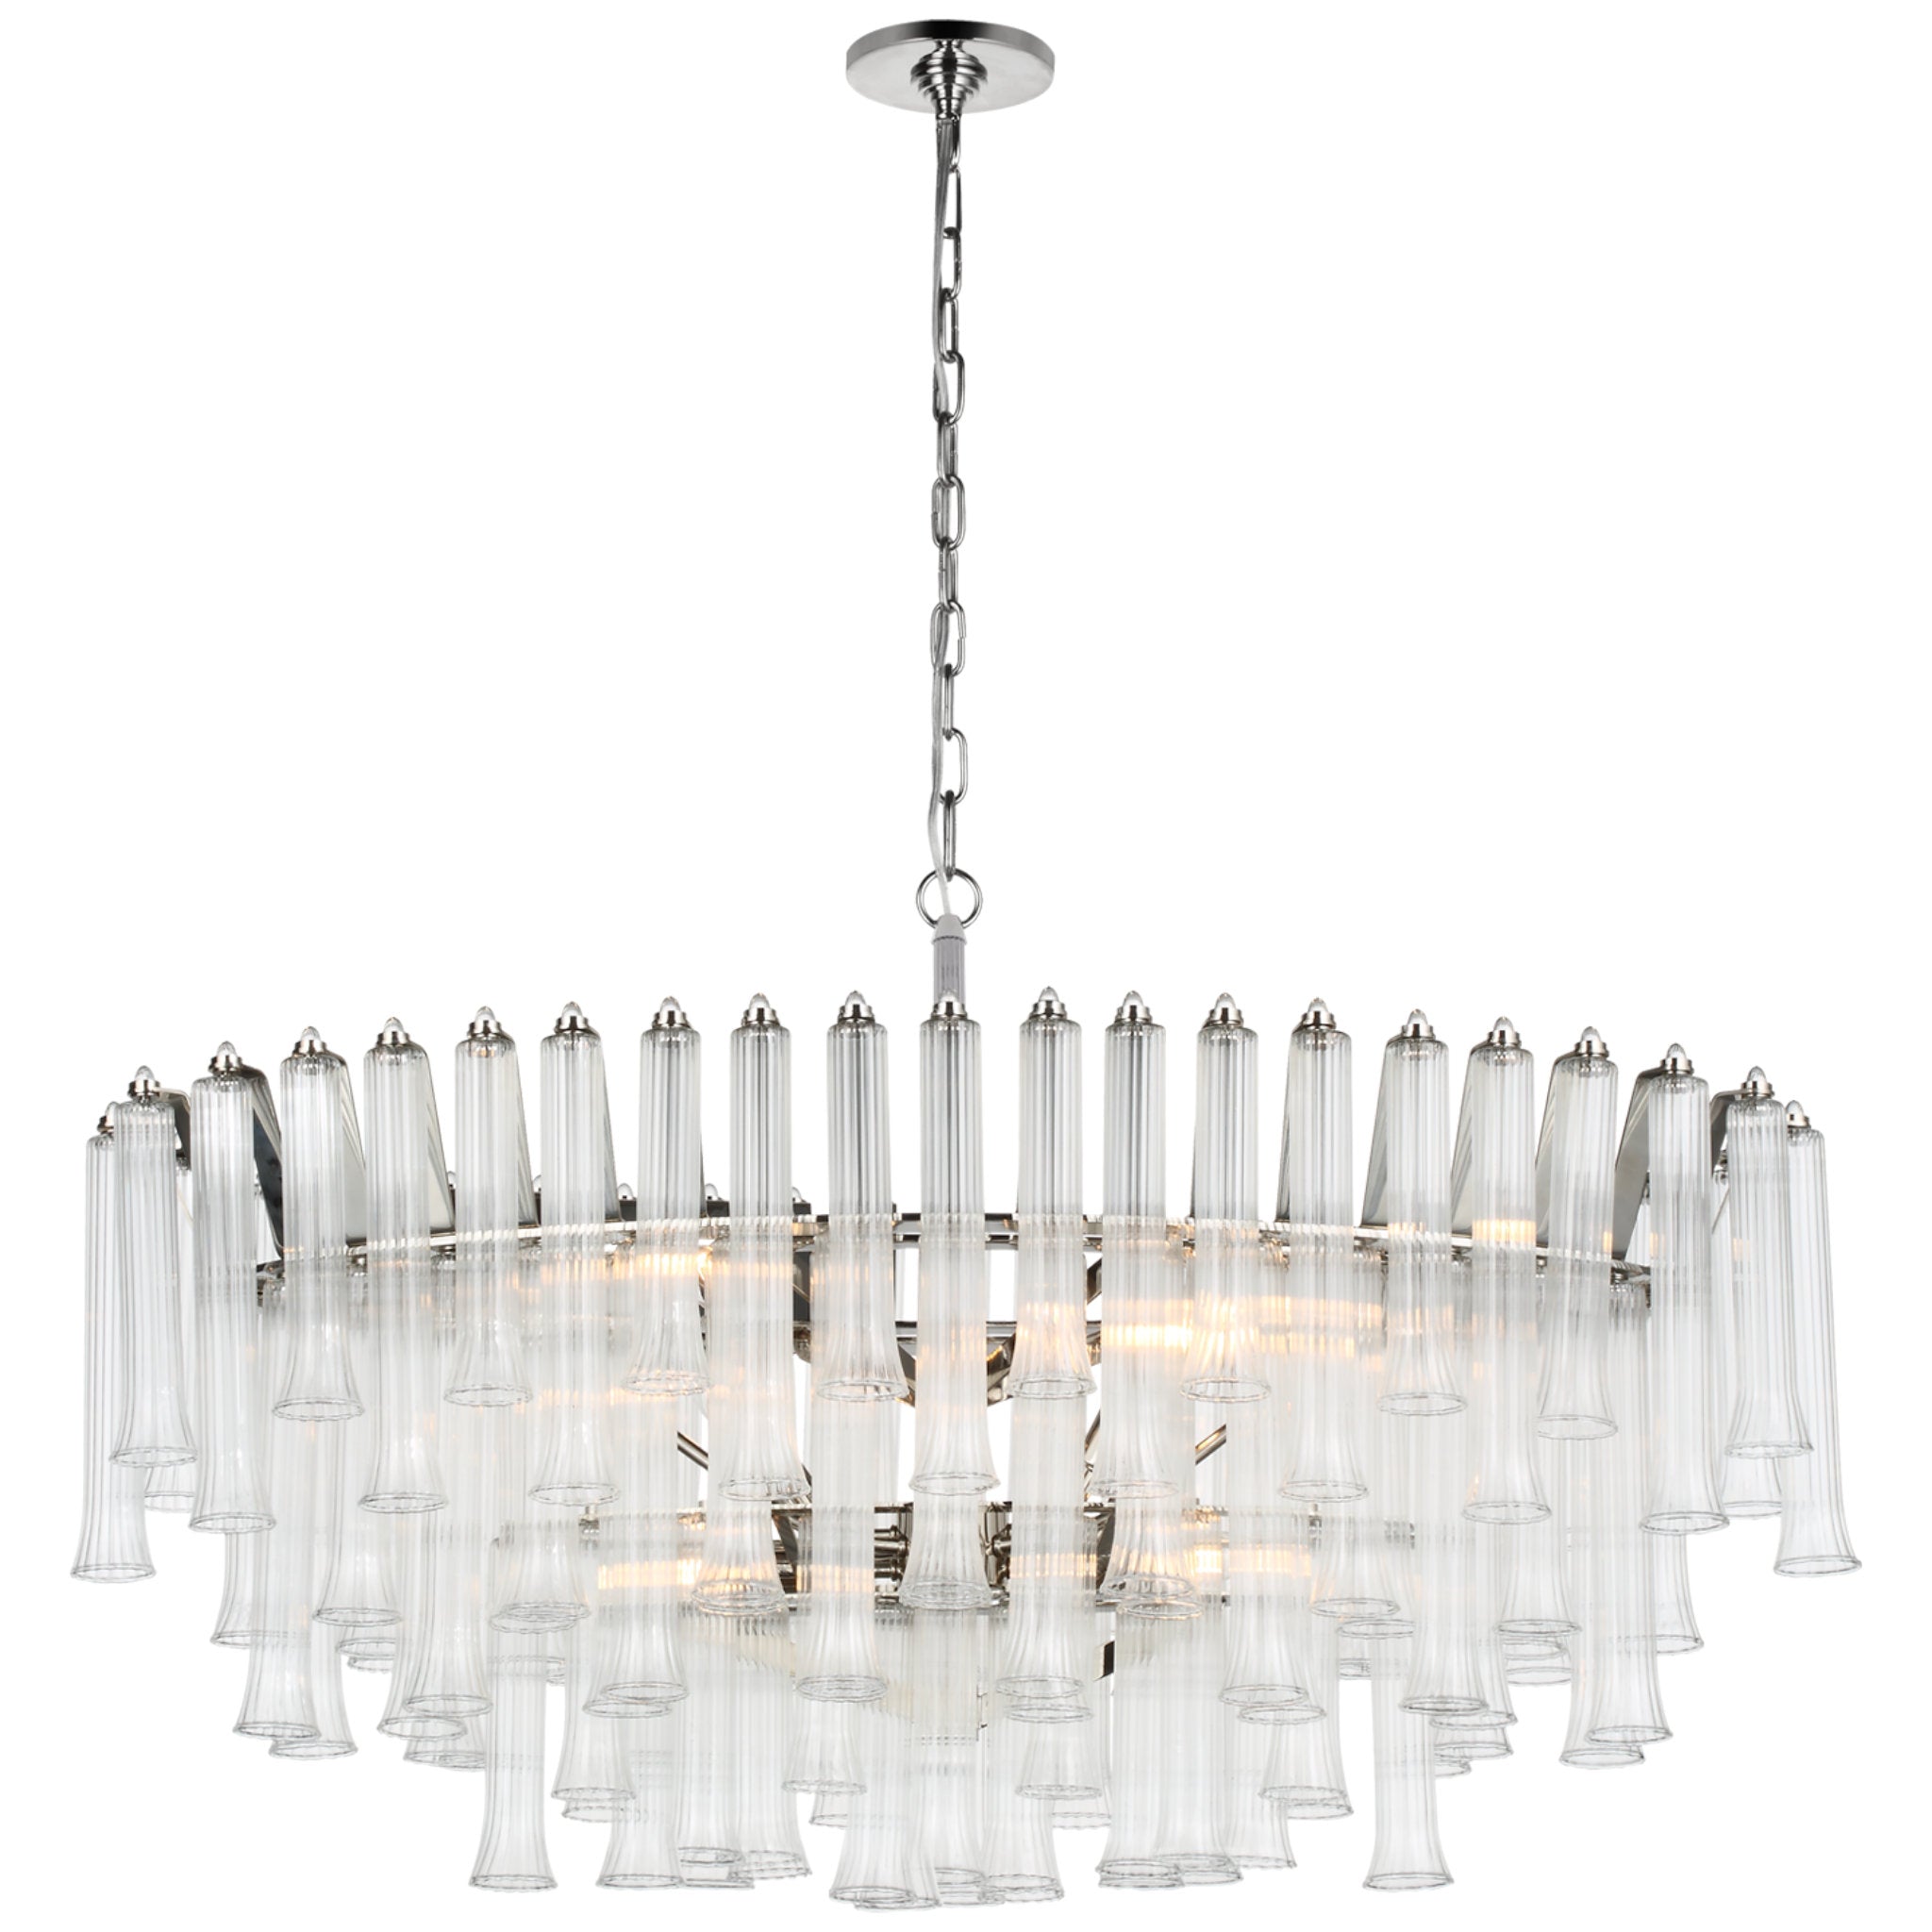 Julie Neill Lorelei X-Large Oval Chandelier in Polished Nickel with Clear Glass